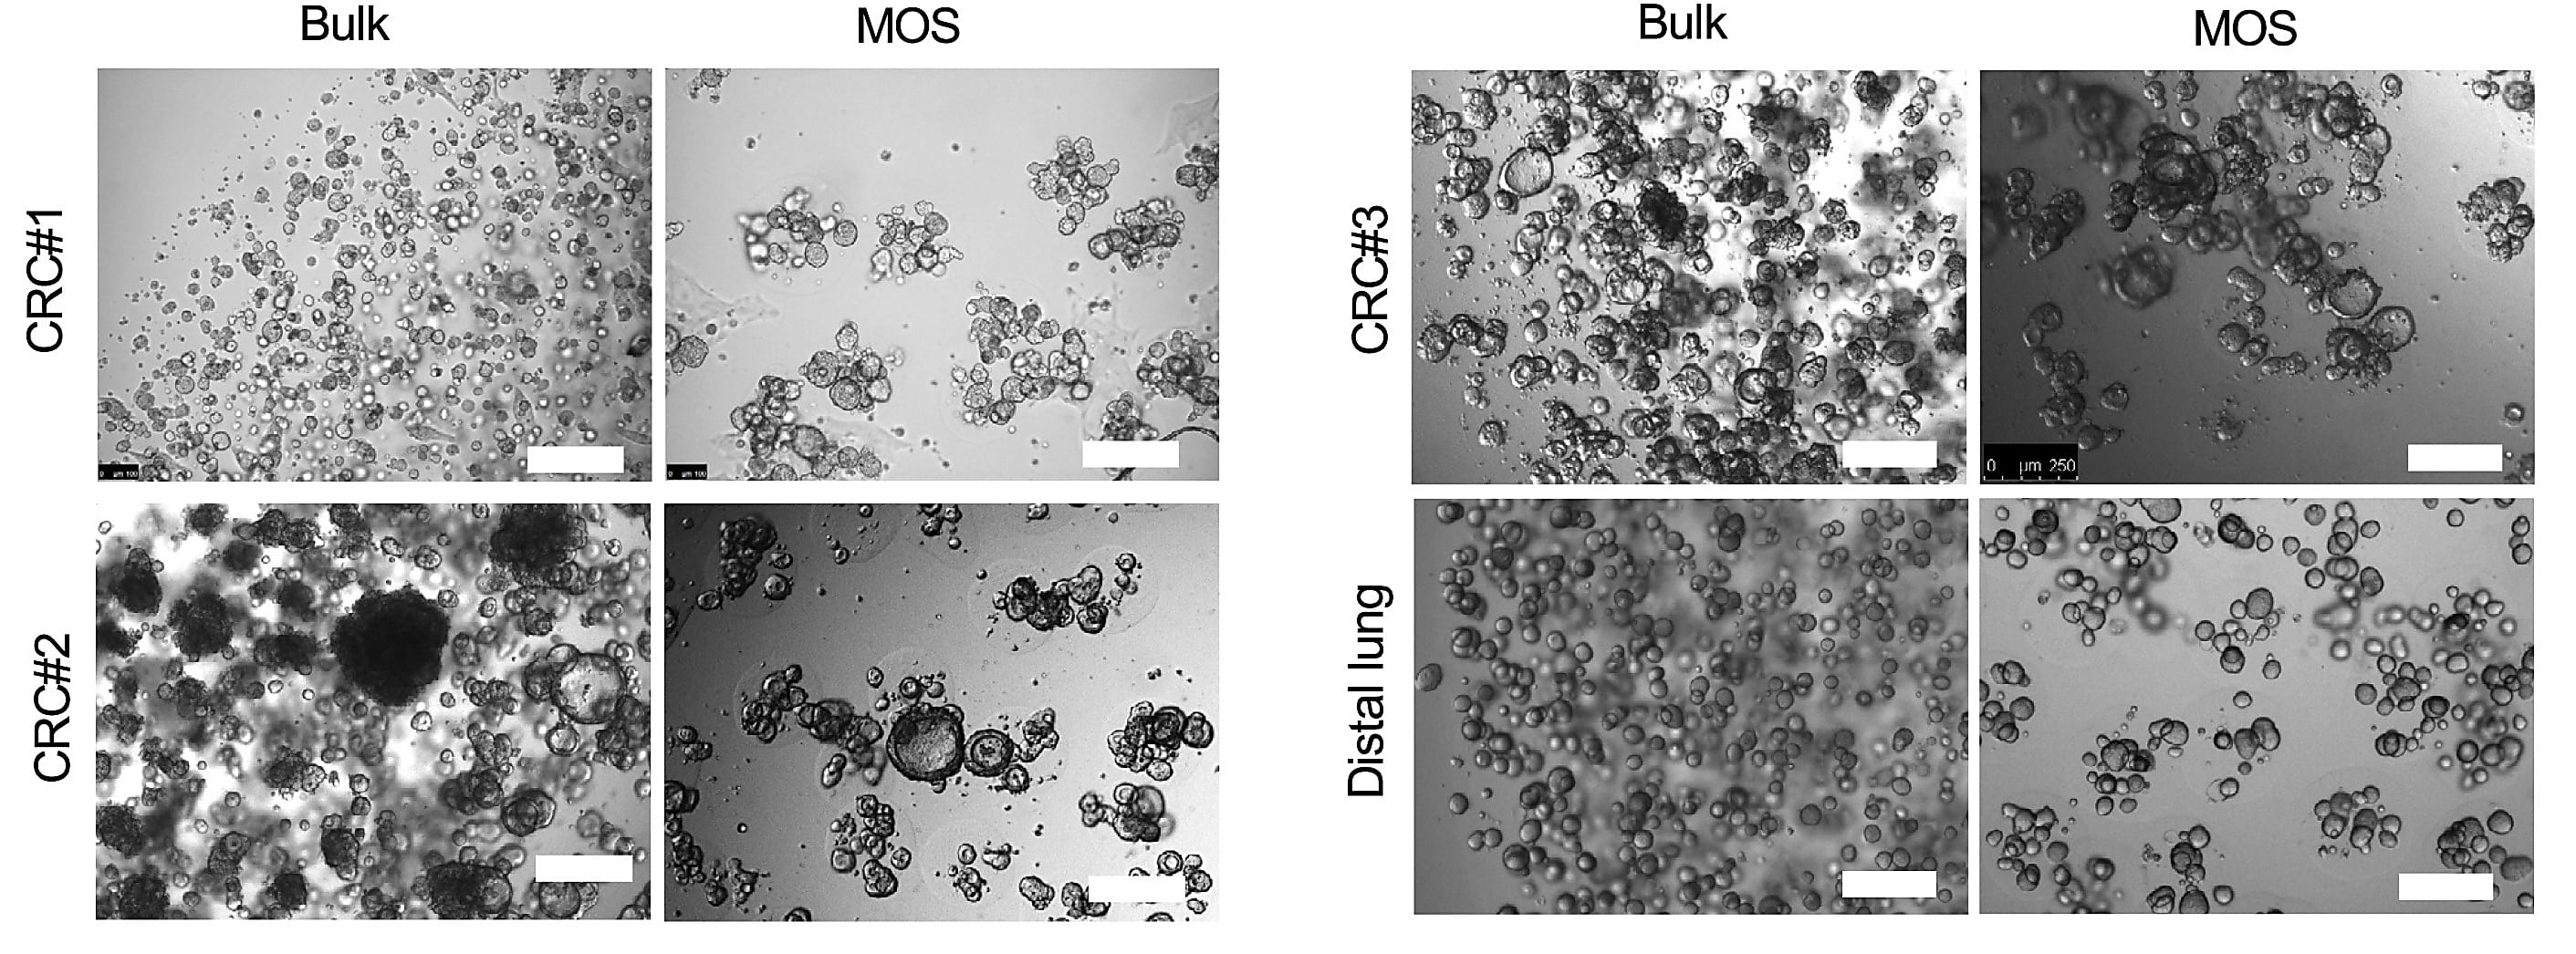 Researchers used tumor samples from three colorectal cancer (CRC) patient tumor samples and a distal lung cell line to develop bulk organoid cultures and microorganospheres (MOS). CREDIT: Wang Z, et al. Stem Cell Reports 17: 959–1975 (2022) (12), (CC BY 4.0)